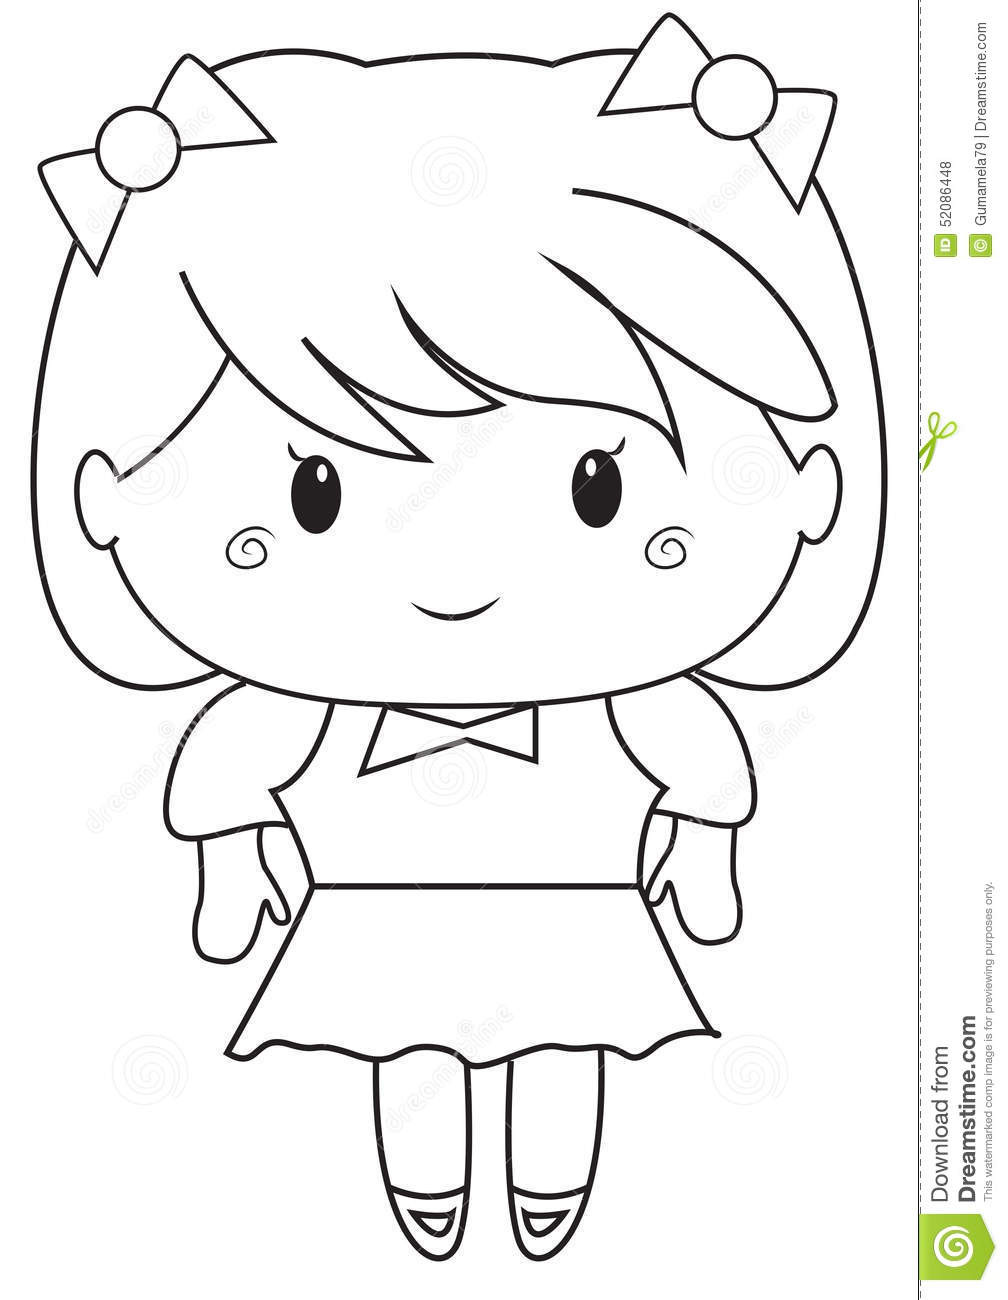 The 25 Best Ideas for Coloring Pages for Little Girls - Home, Family ...